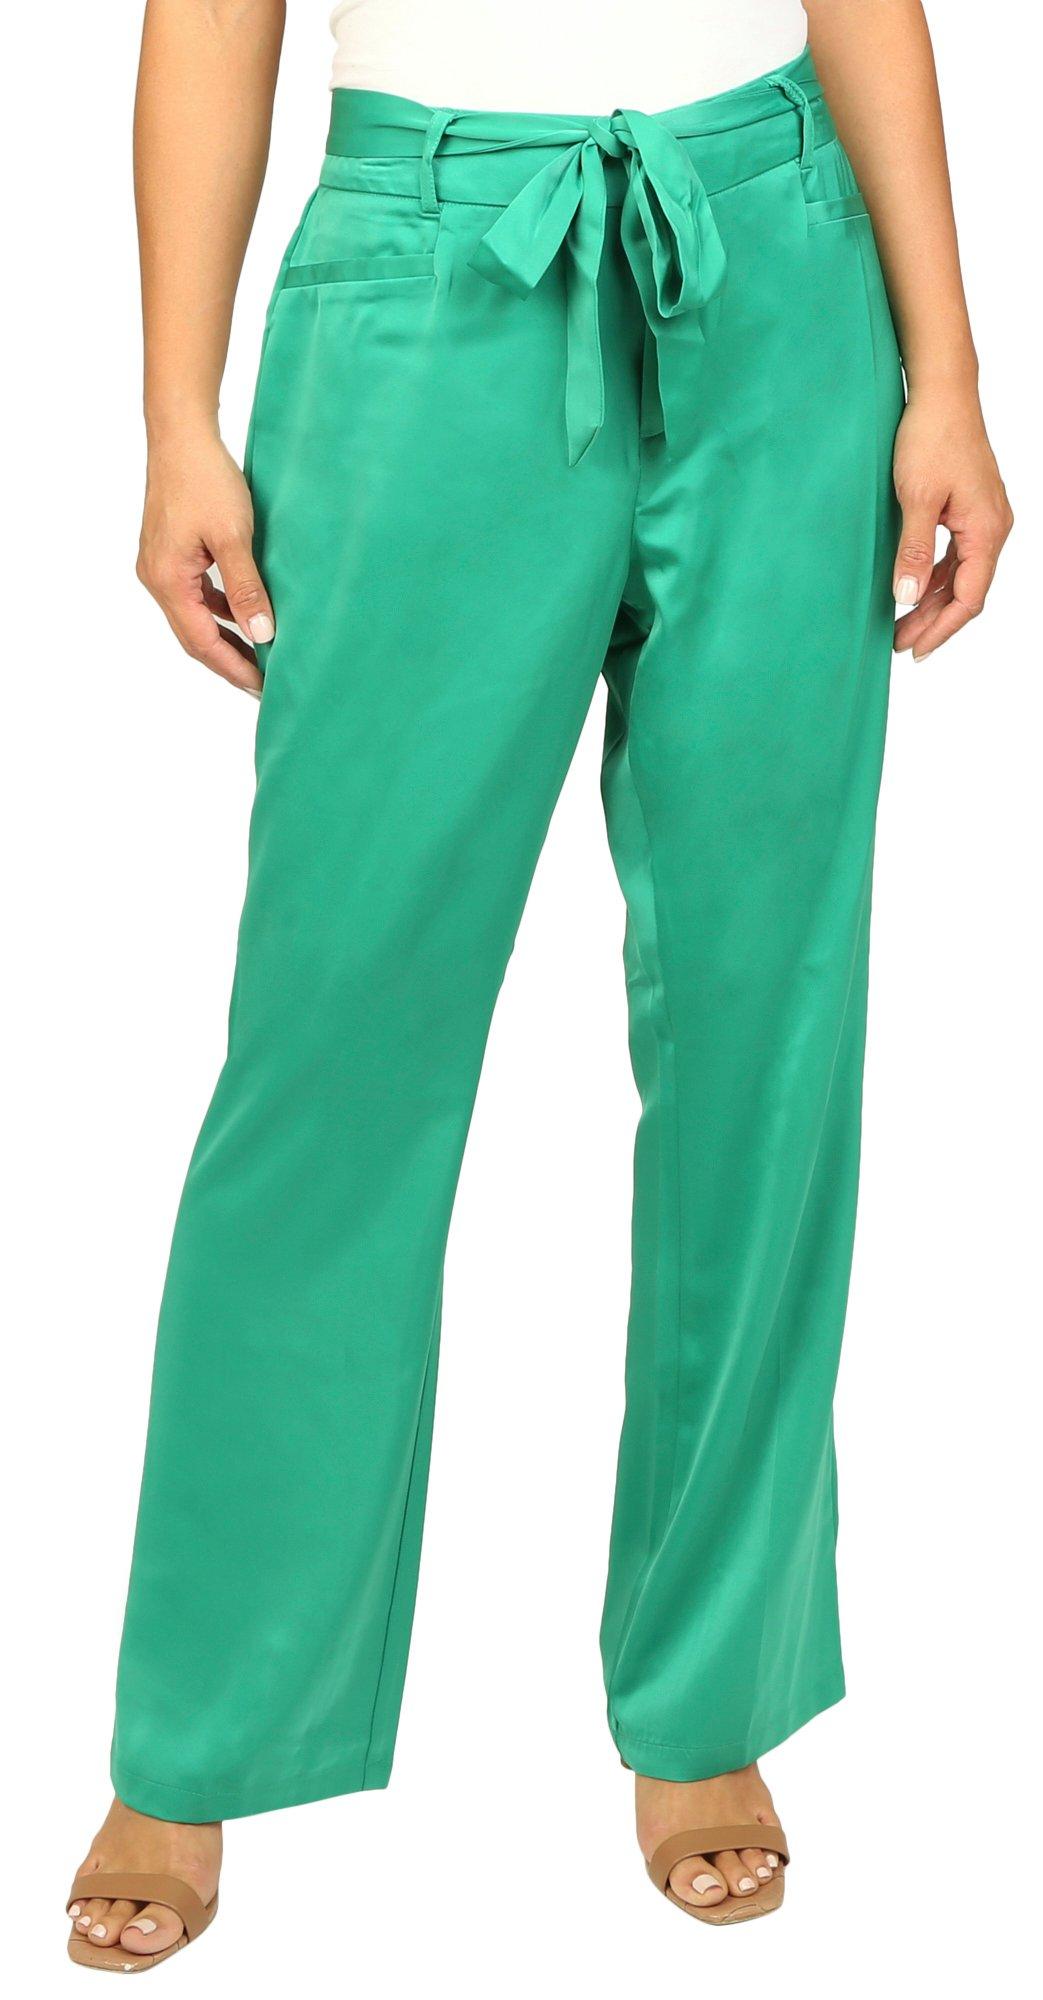 Blue Sol Womens Solid Satin Flare Trouser Pants